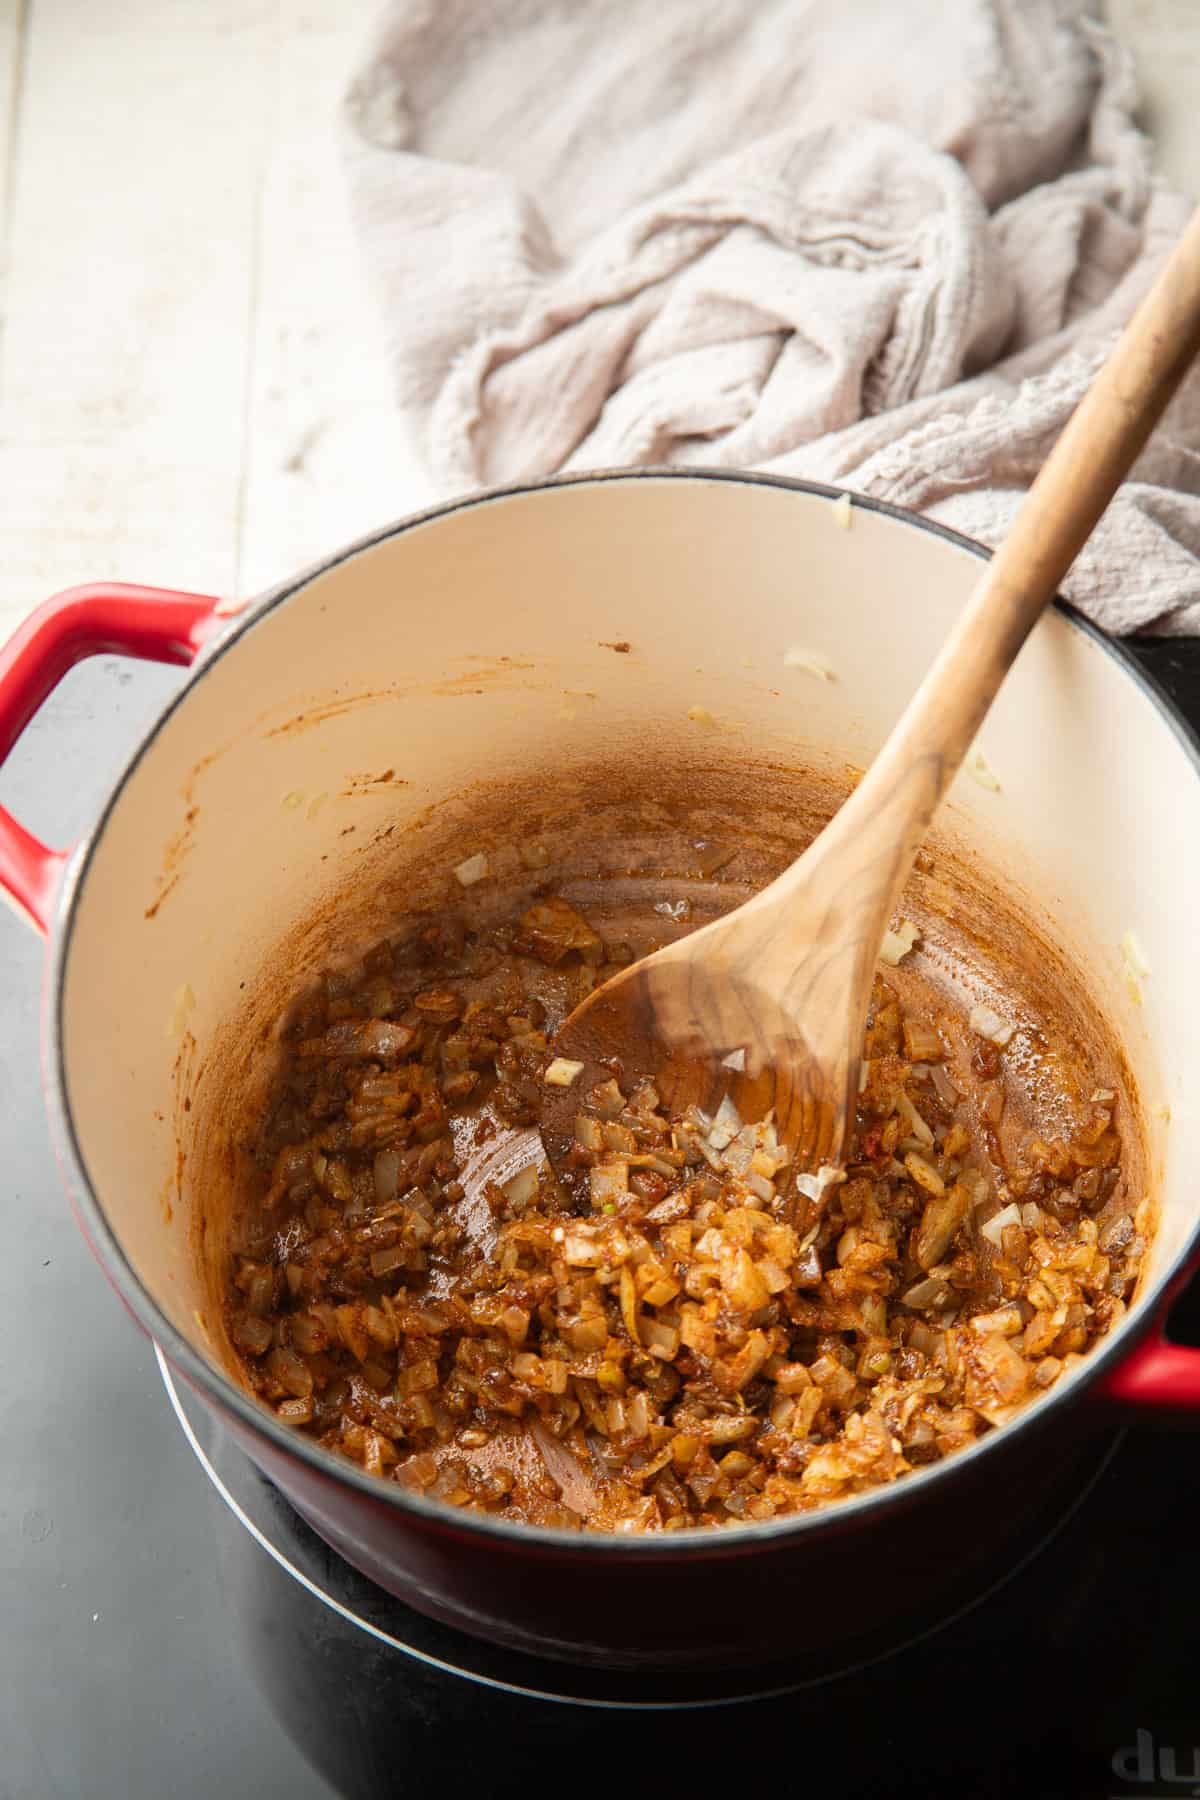 Diced onion, garlic, and spices cooking in a pot with a wooden spoon.